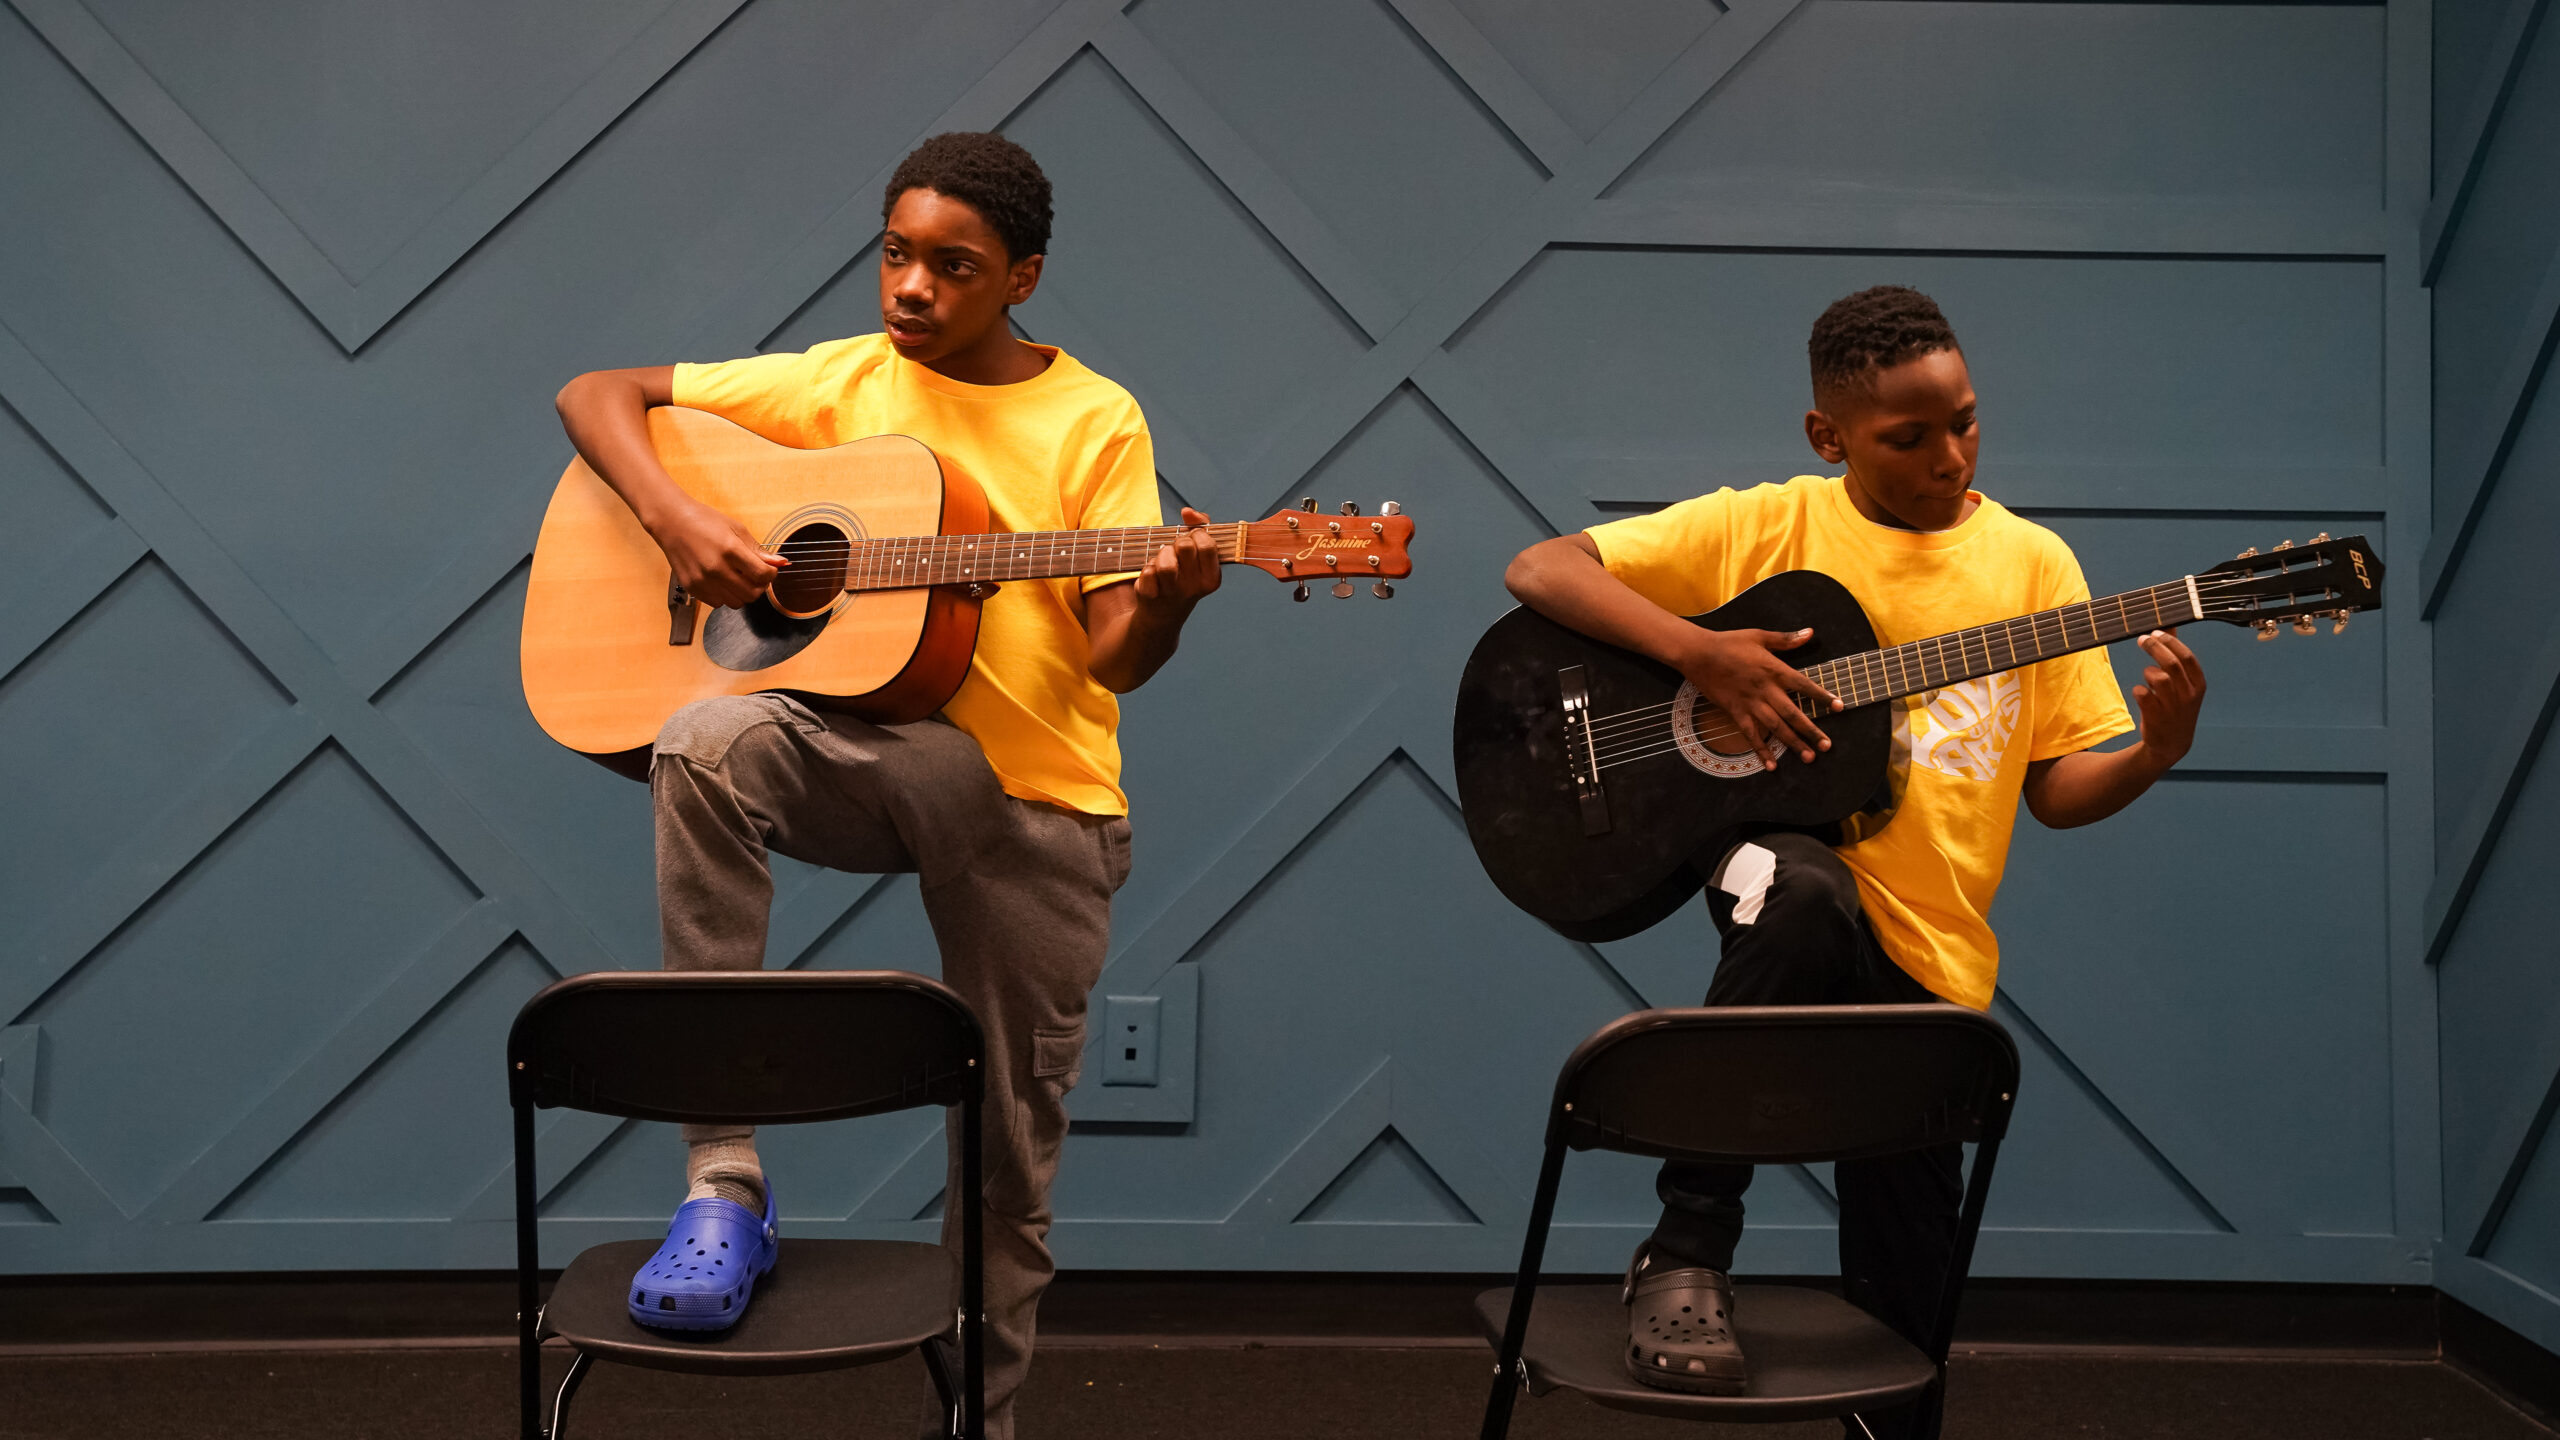 Two young boys hold guitars, with their feet up on chairs as they play